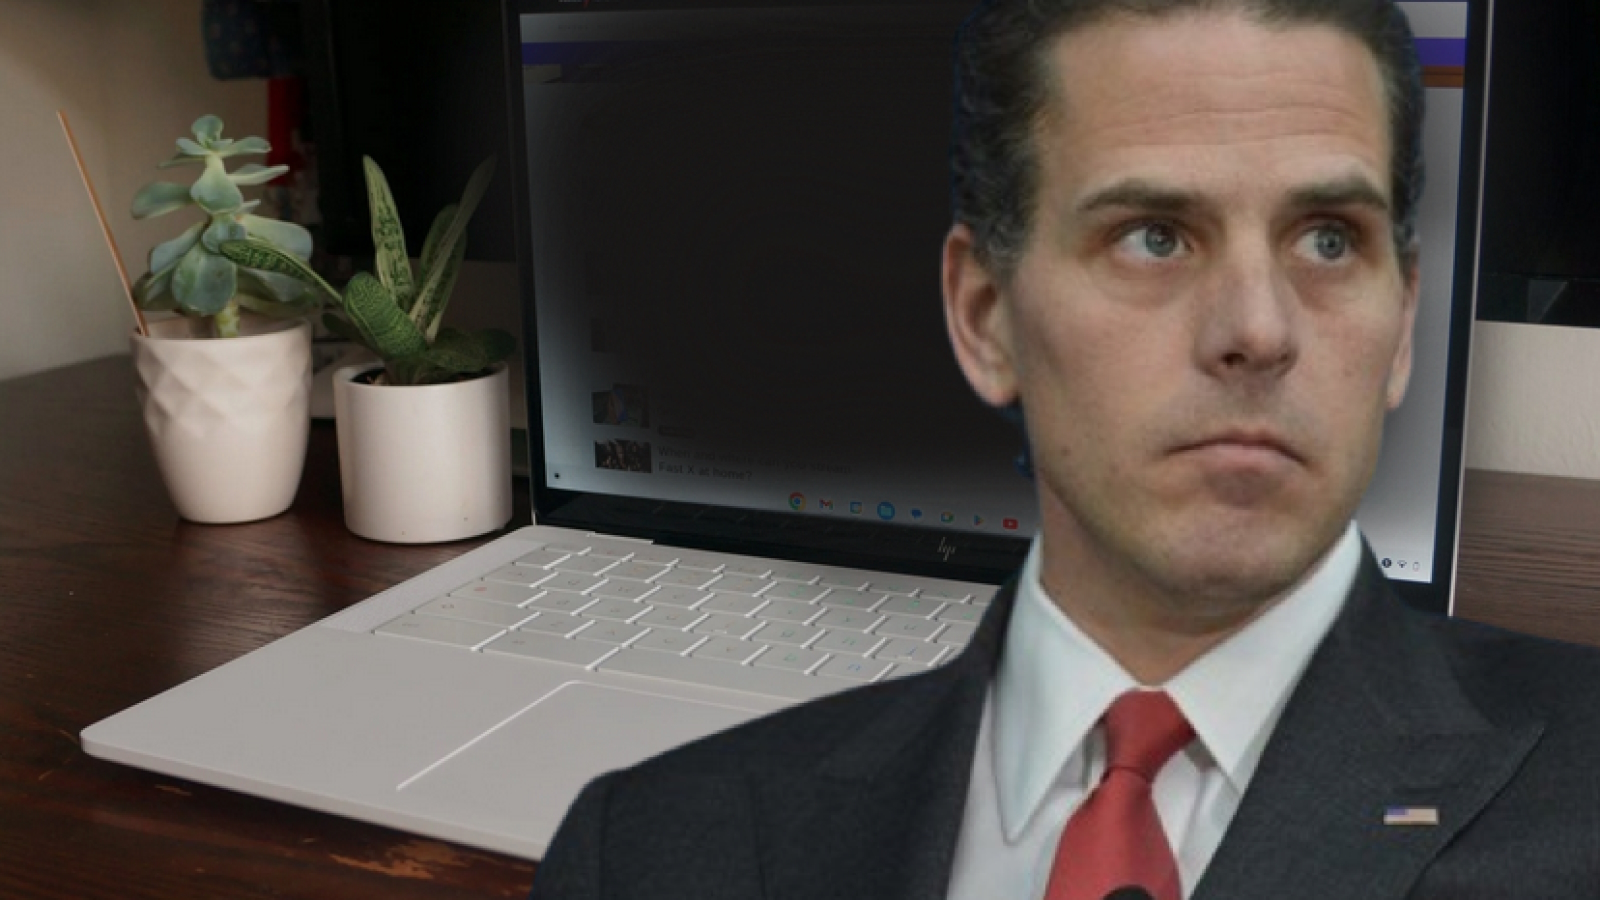 “Unprecedented” and “Outrageous”: Reporter Investigating Hunter Biden Laptop Has Files Seized